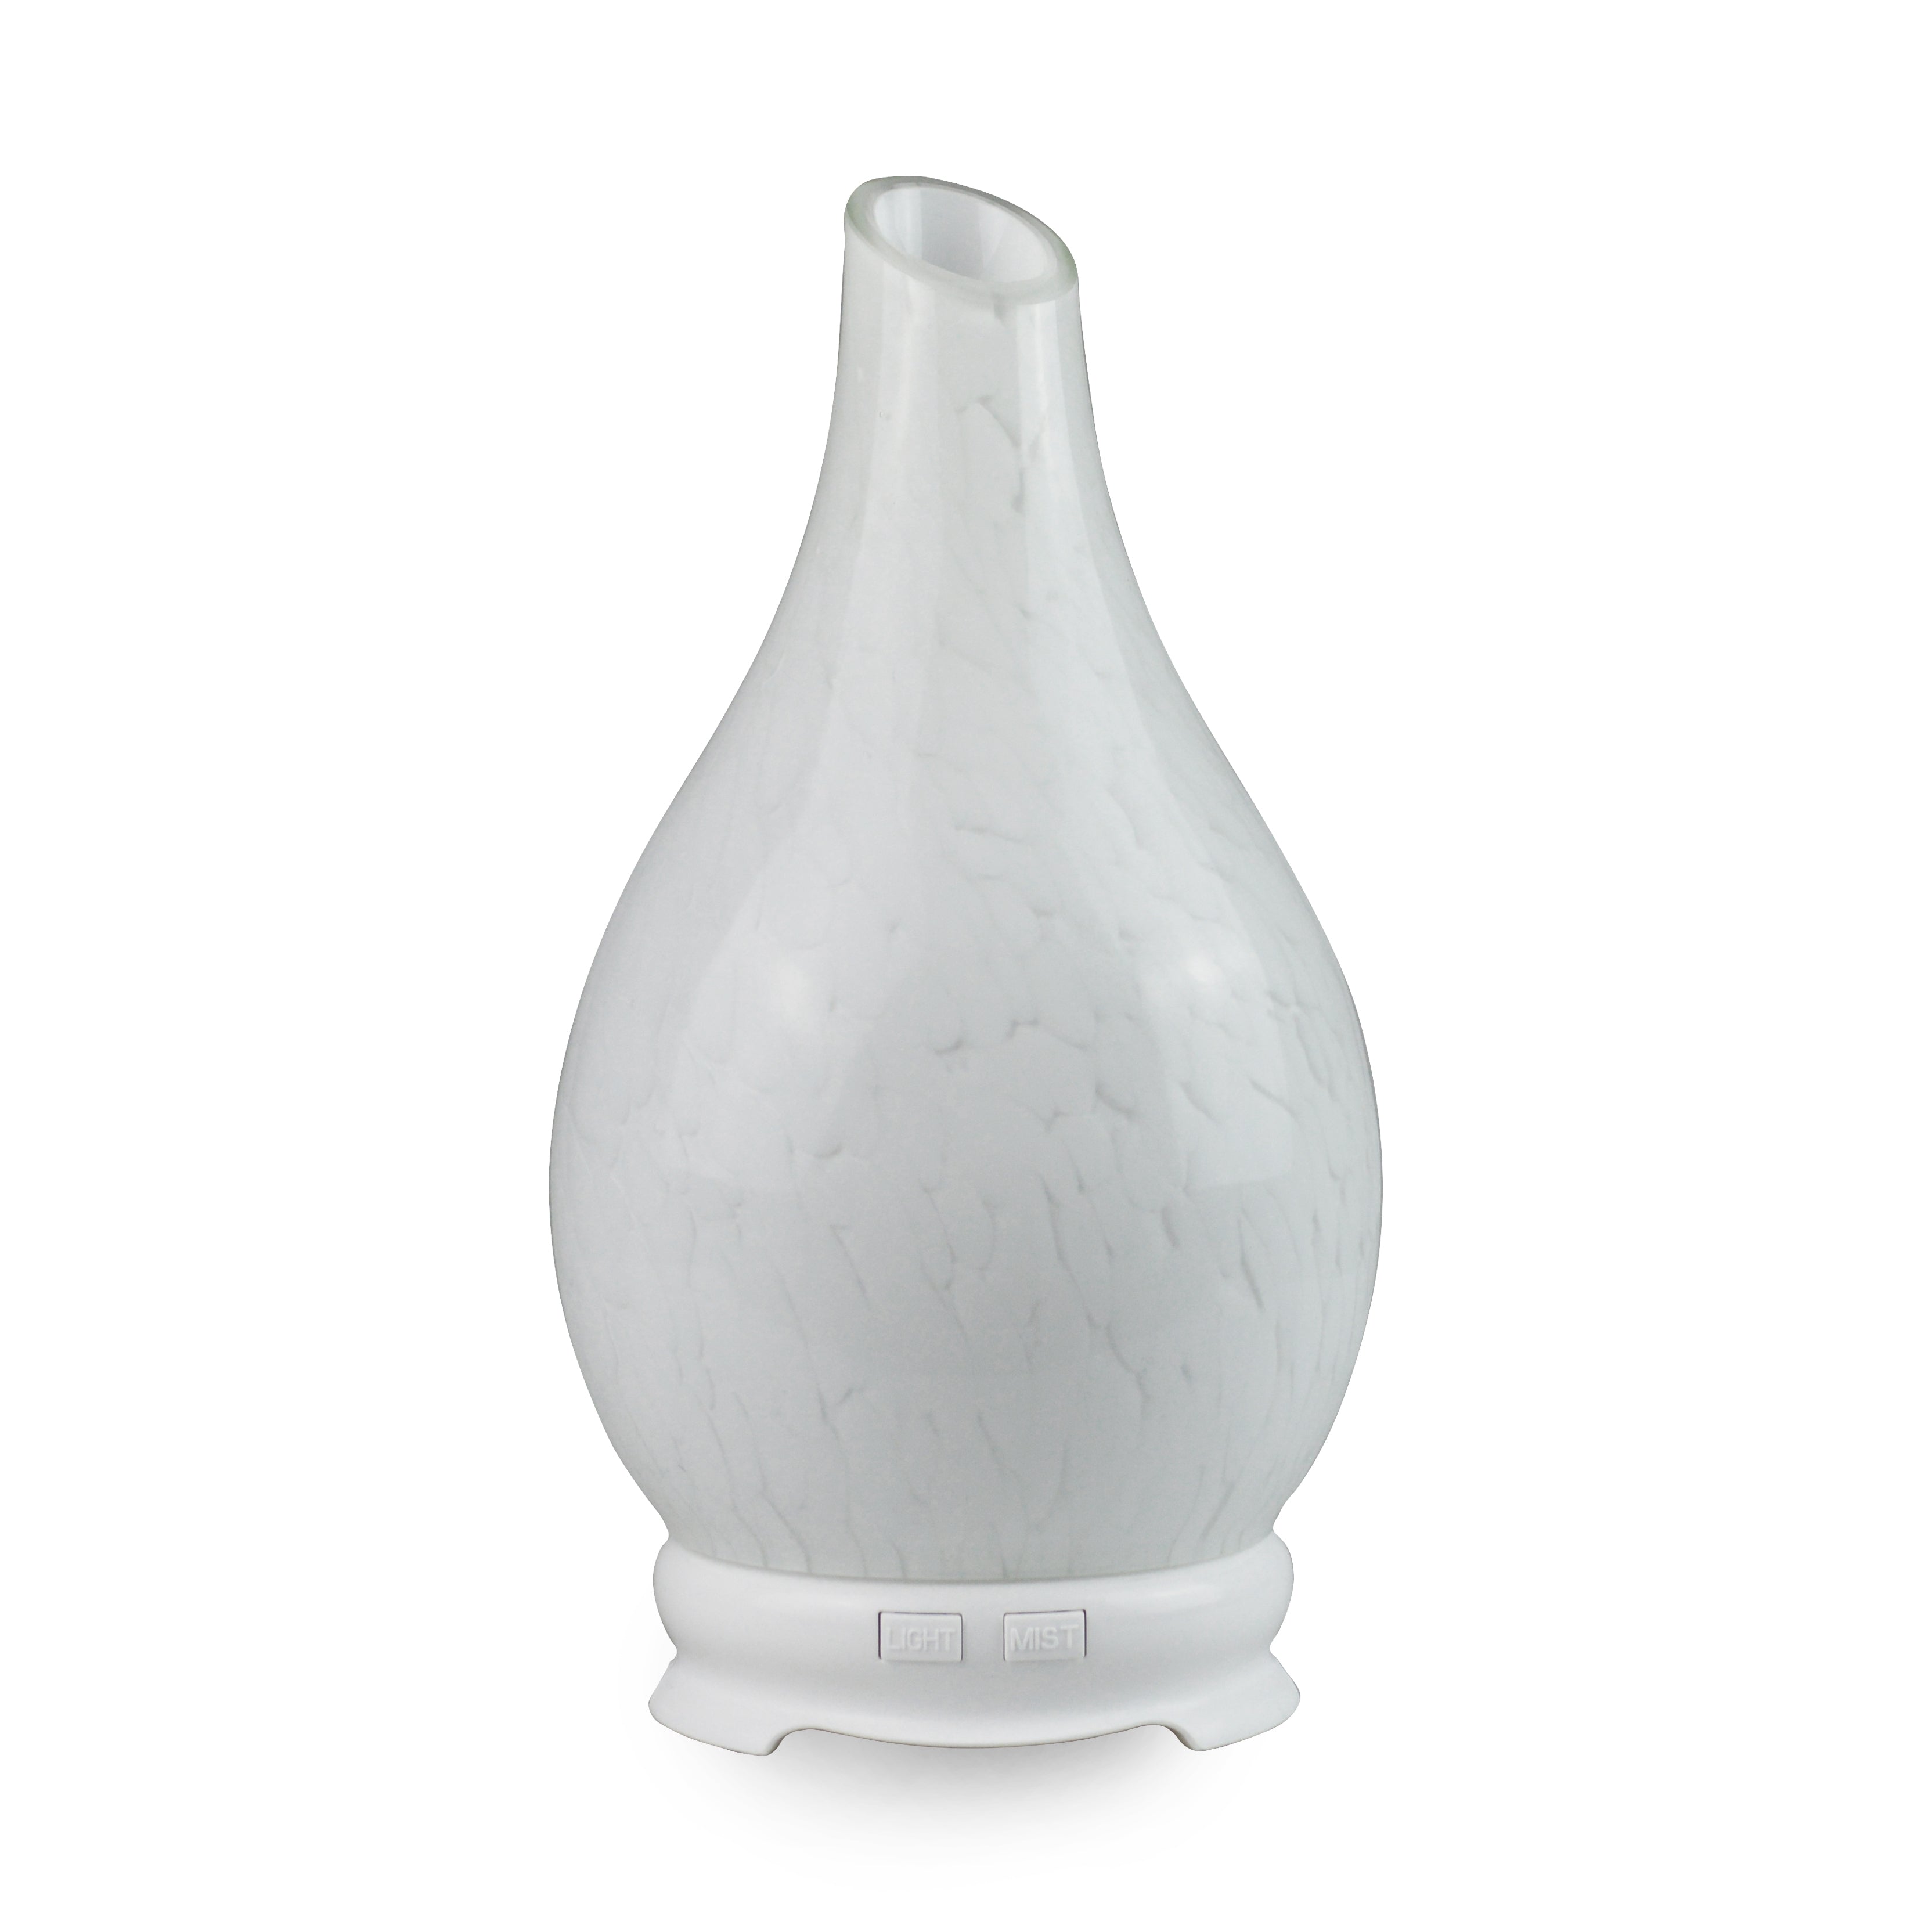 Shop for uni essentials with our Ultrasonic Diffuser collection. This Marble art humidifier works hard diffusing your fragrance oils to create the perfect aromatherapy atmosphere. 